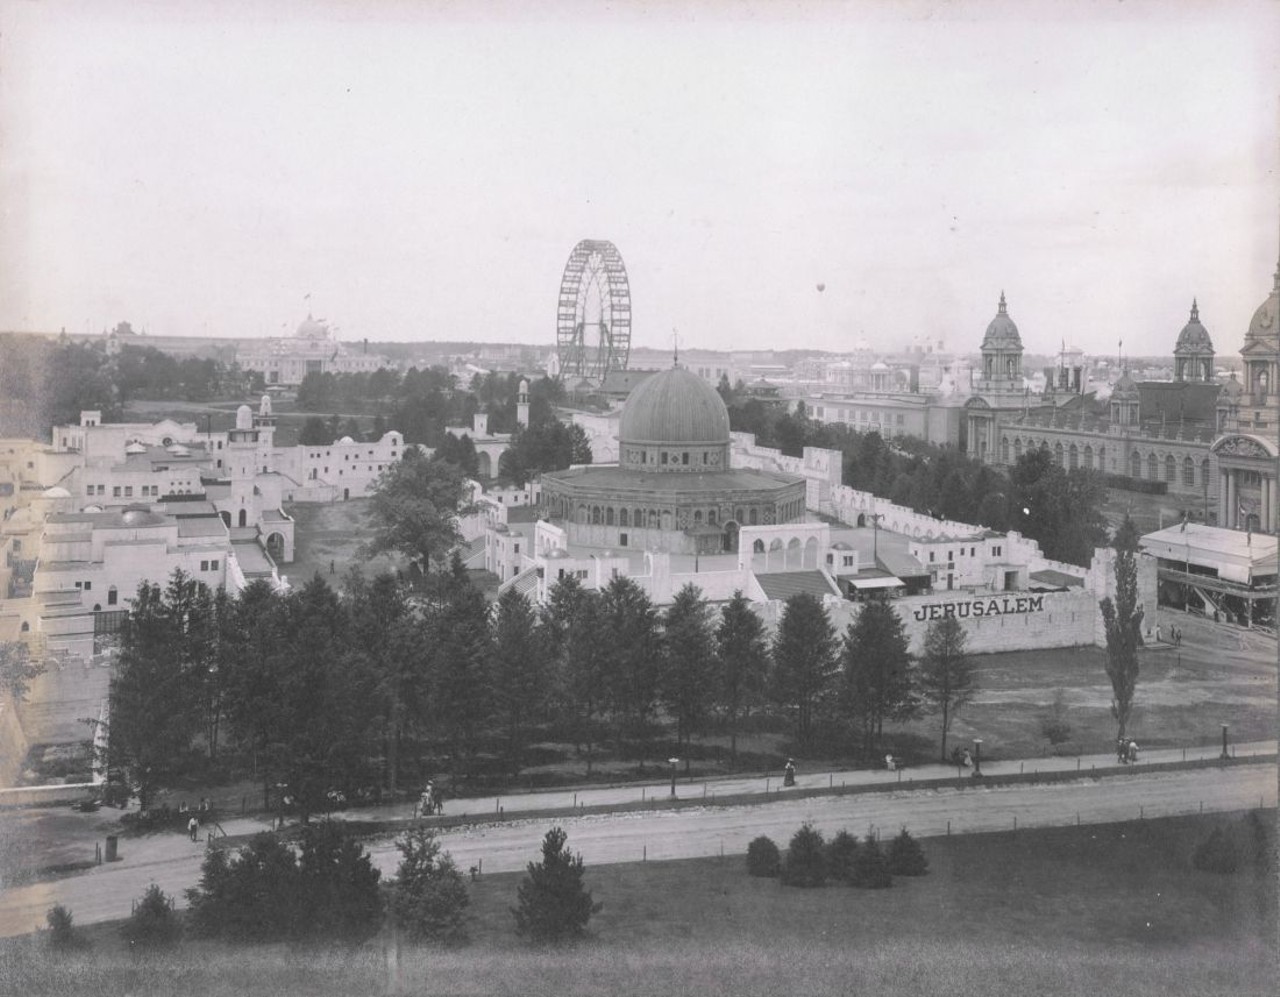 VIEW WEST FROM THE WEST PAVILION INCLUDING JERUSALEM AND THE FERRIS WHEEL AT THE 1904 WORLD'S FAIR.
Find out more about this photo at MoHistory.org.